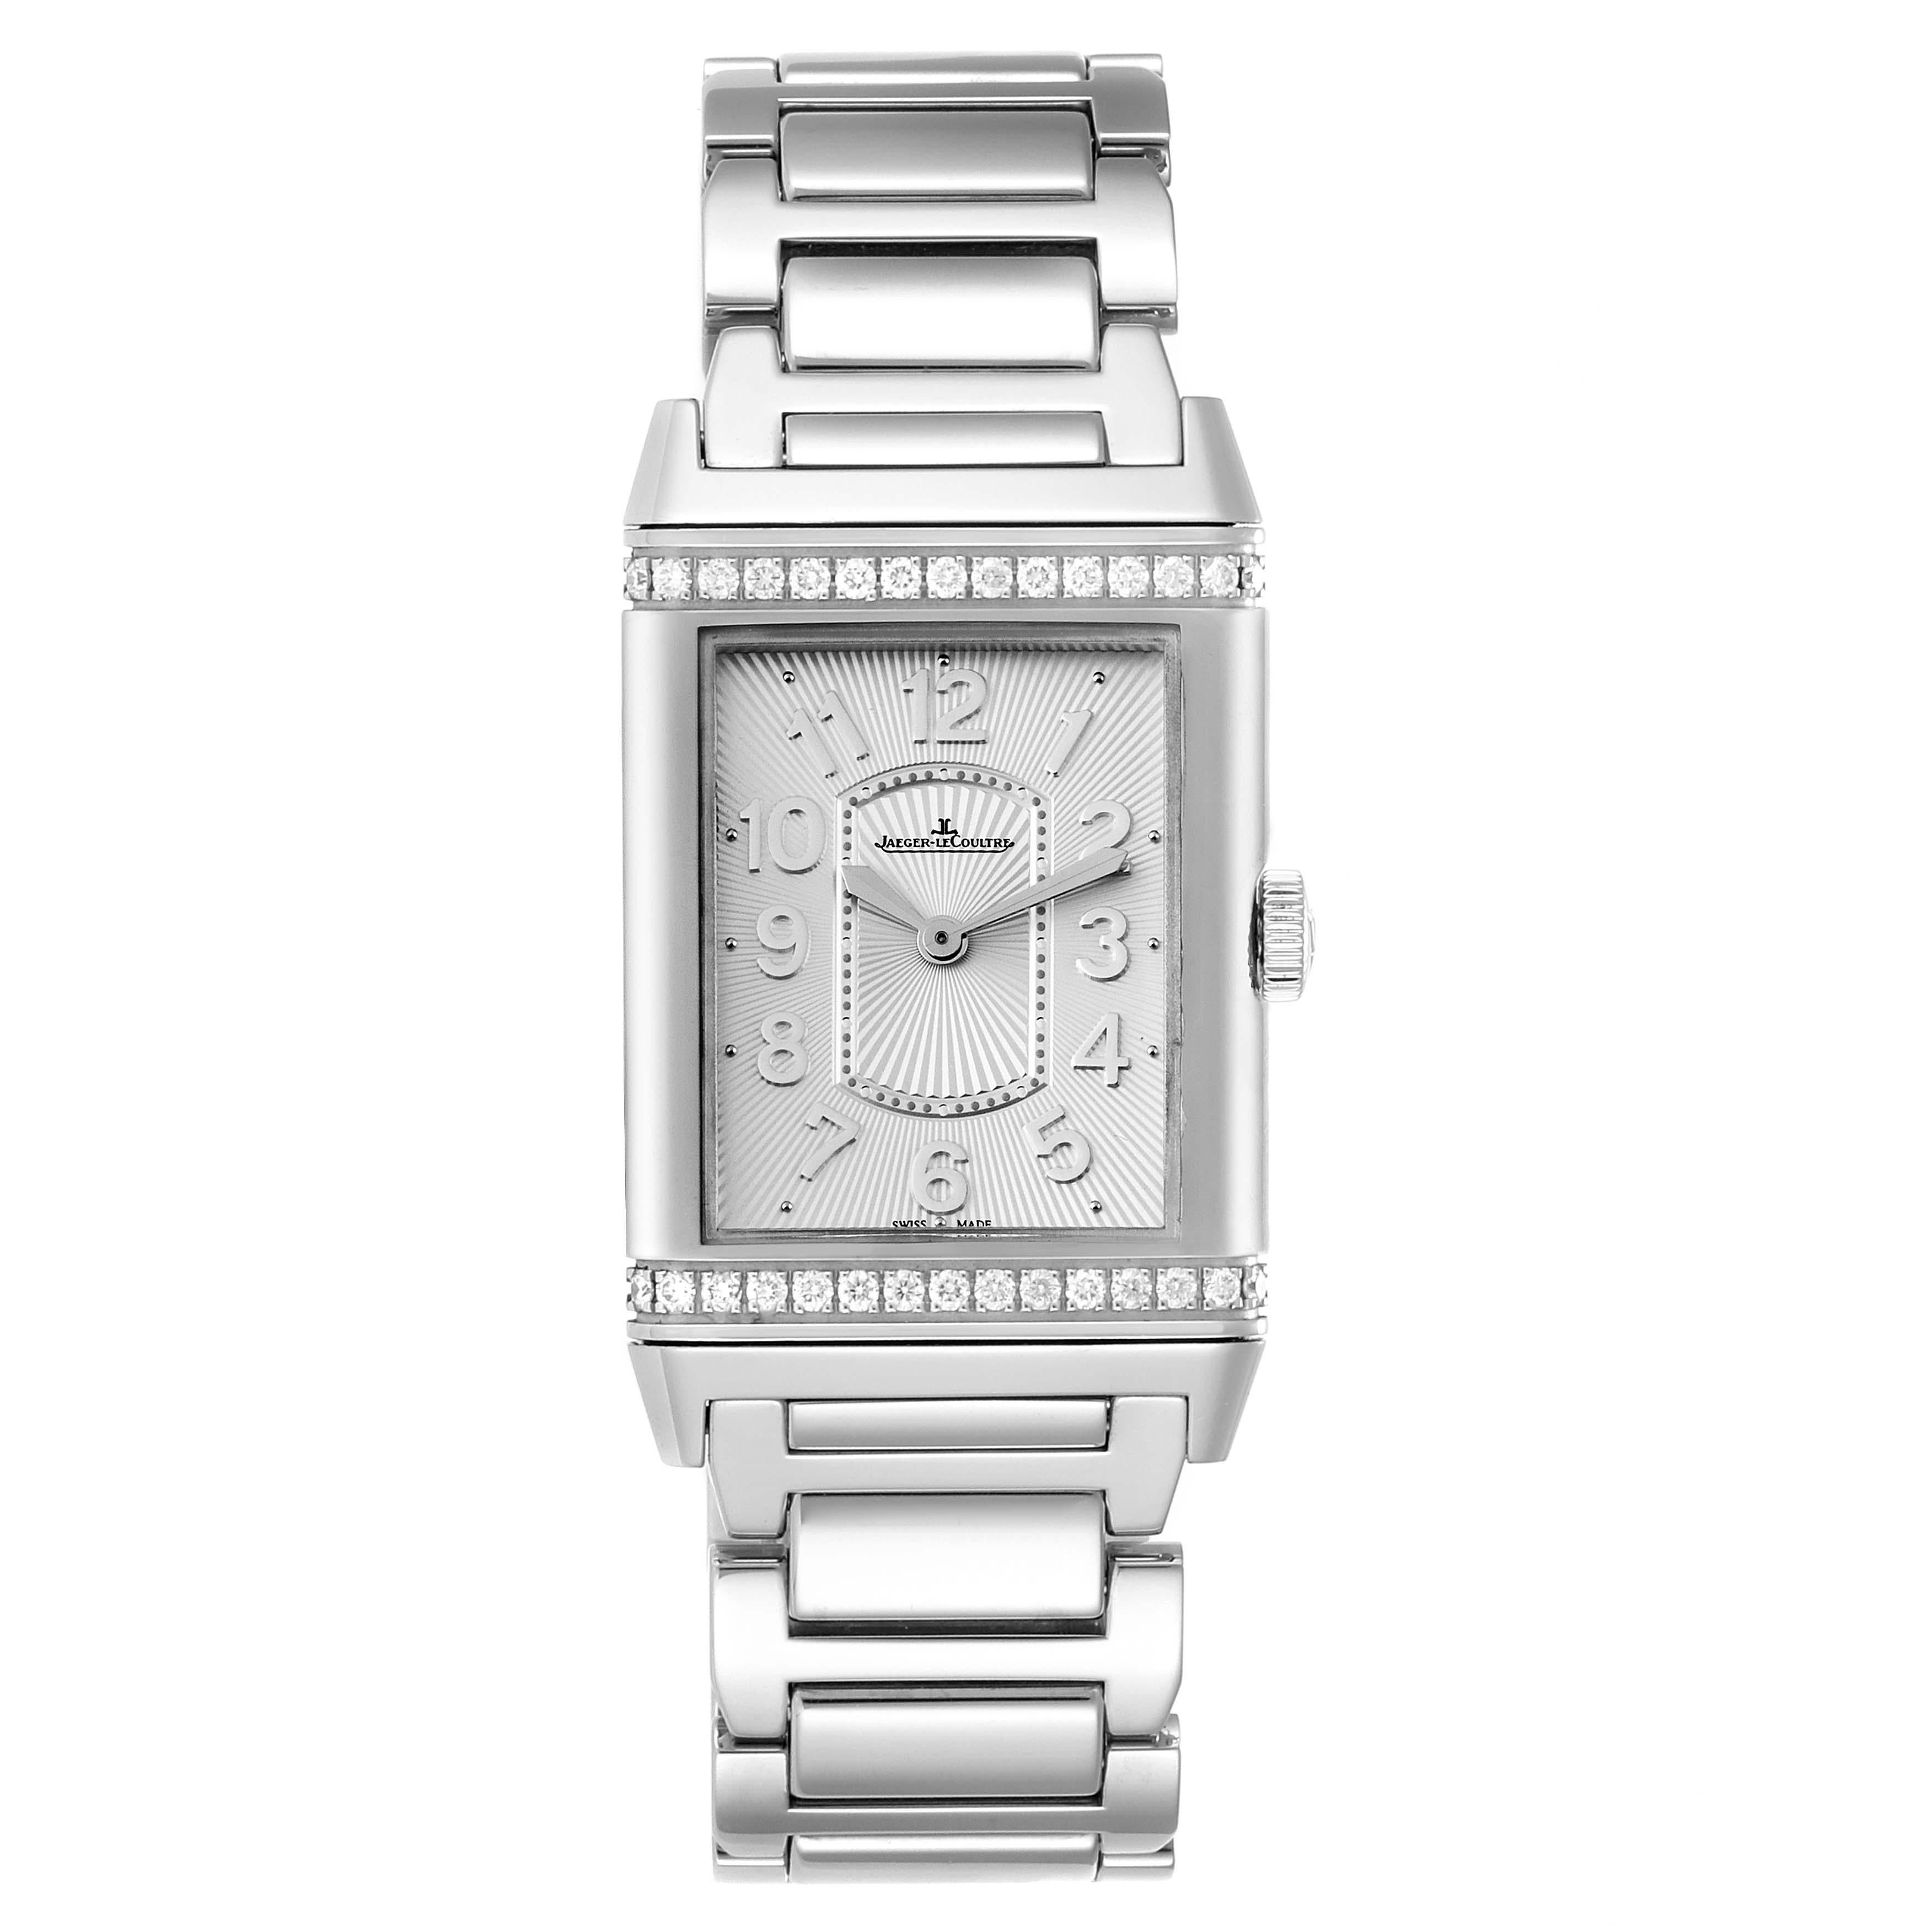 Jaeger LeCoultre Reverso Ultra Thin Diamond Ladies Watch 268.8.86 Q3208121. Manual winding movement. Stainless steel ultra thin 39.0 x 24.0 mm rectangular case with reeded ends, rotating within its back plate. Case thickness 7.2mm. Stainless steel